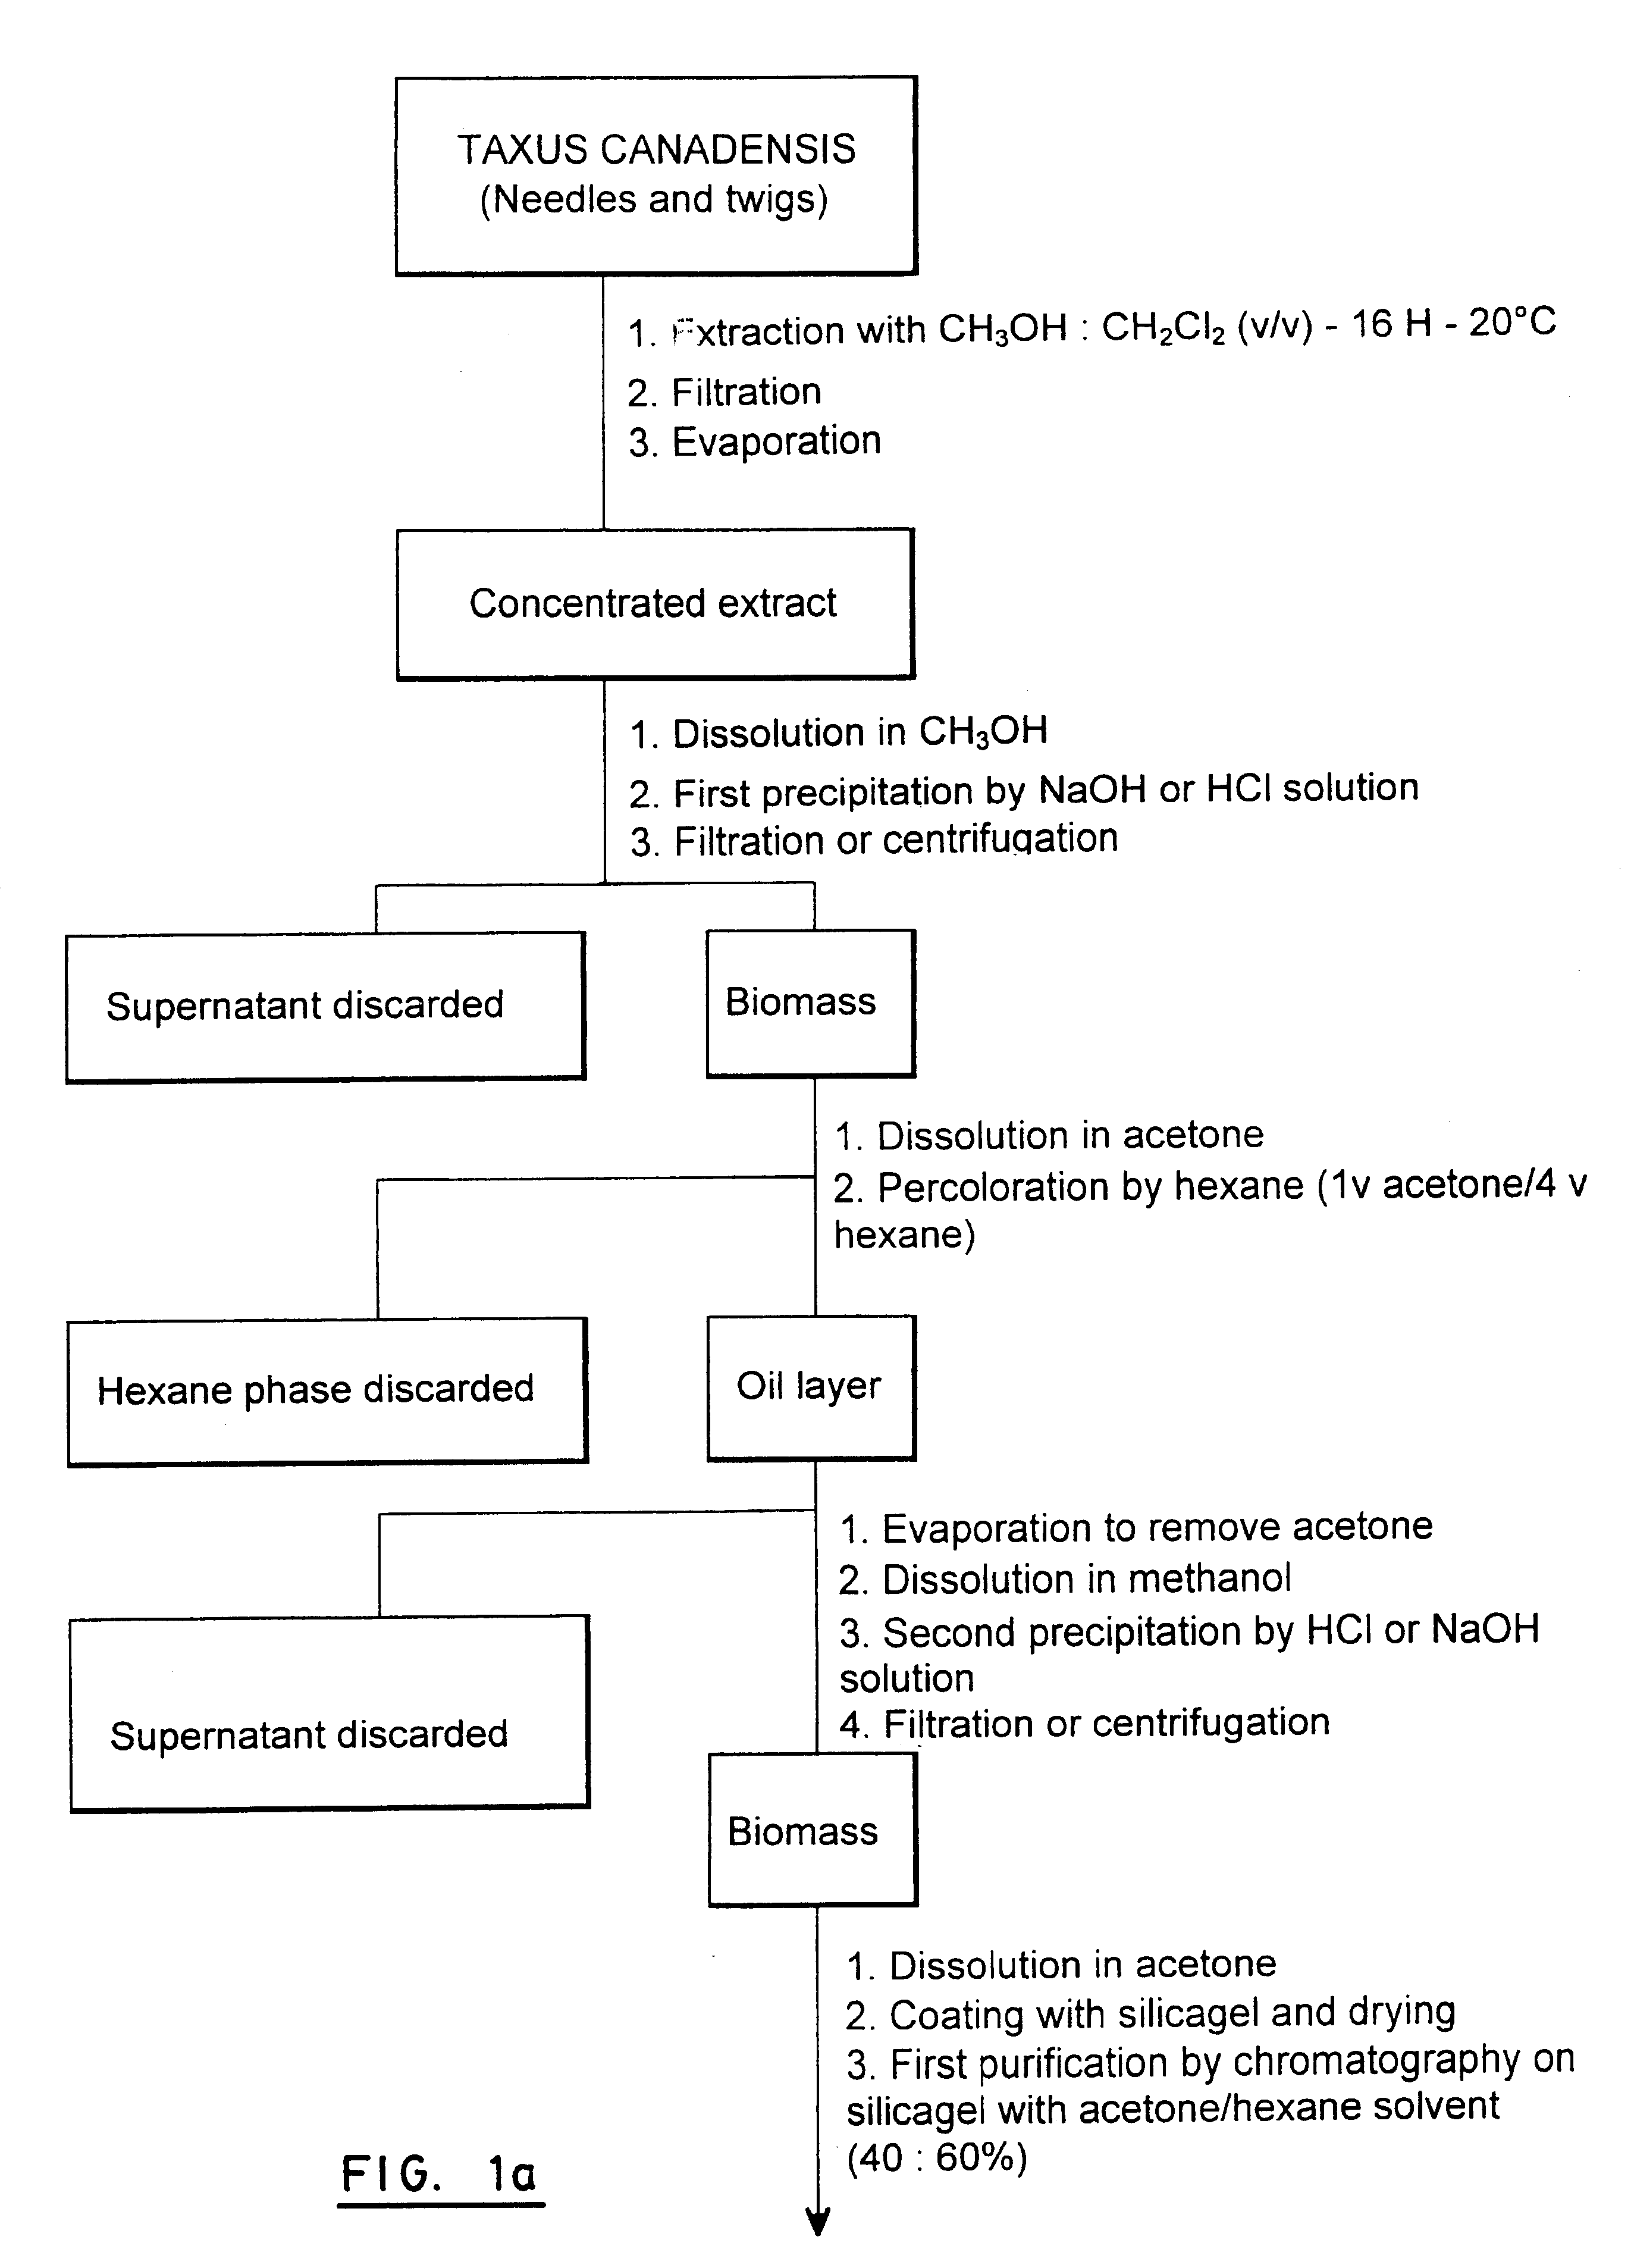 Process for extraction and purification of paclitaxel from natural sources